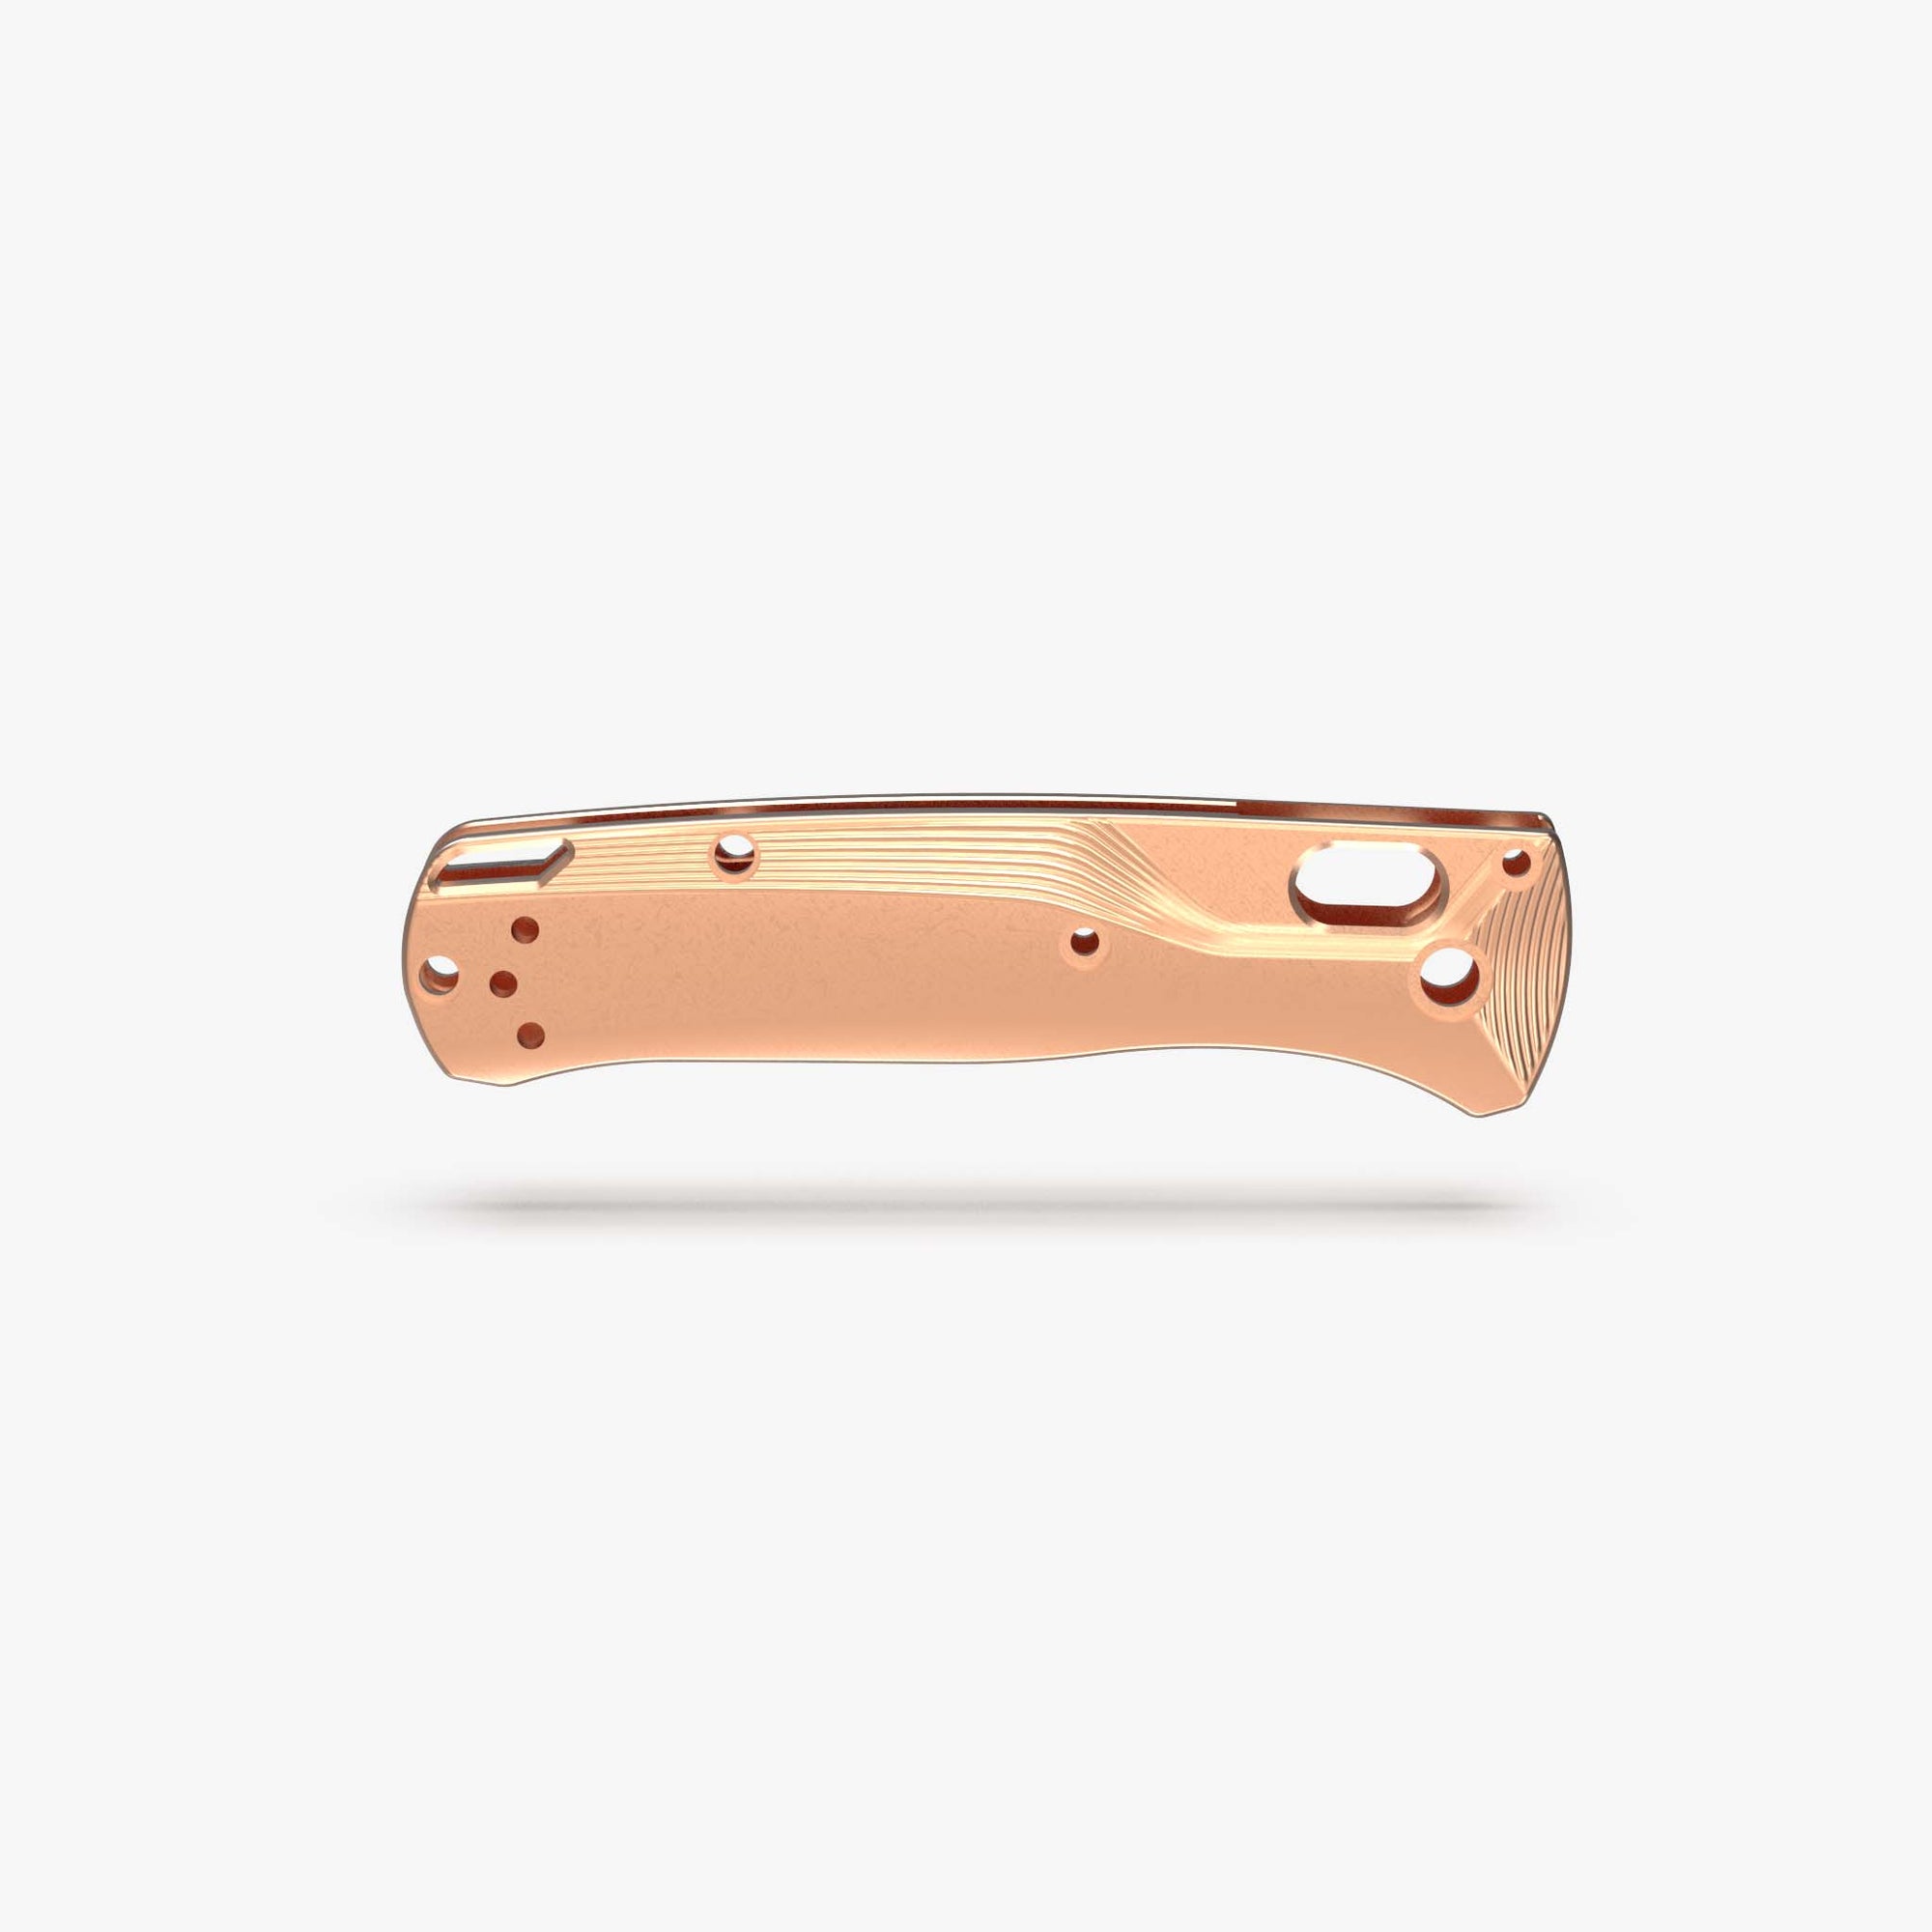 Copper Crossfade Scales for Benchmade MINI Bugout Knife-Copper Stonewash